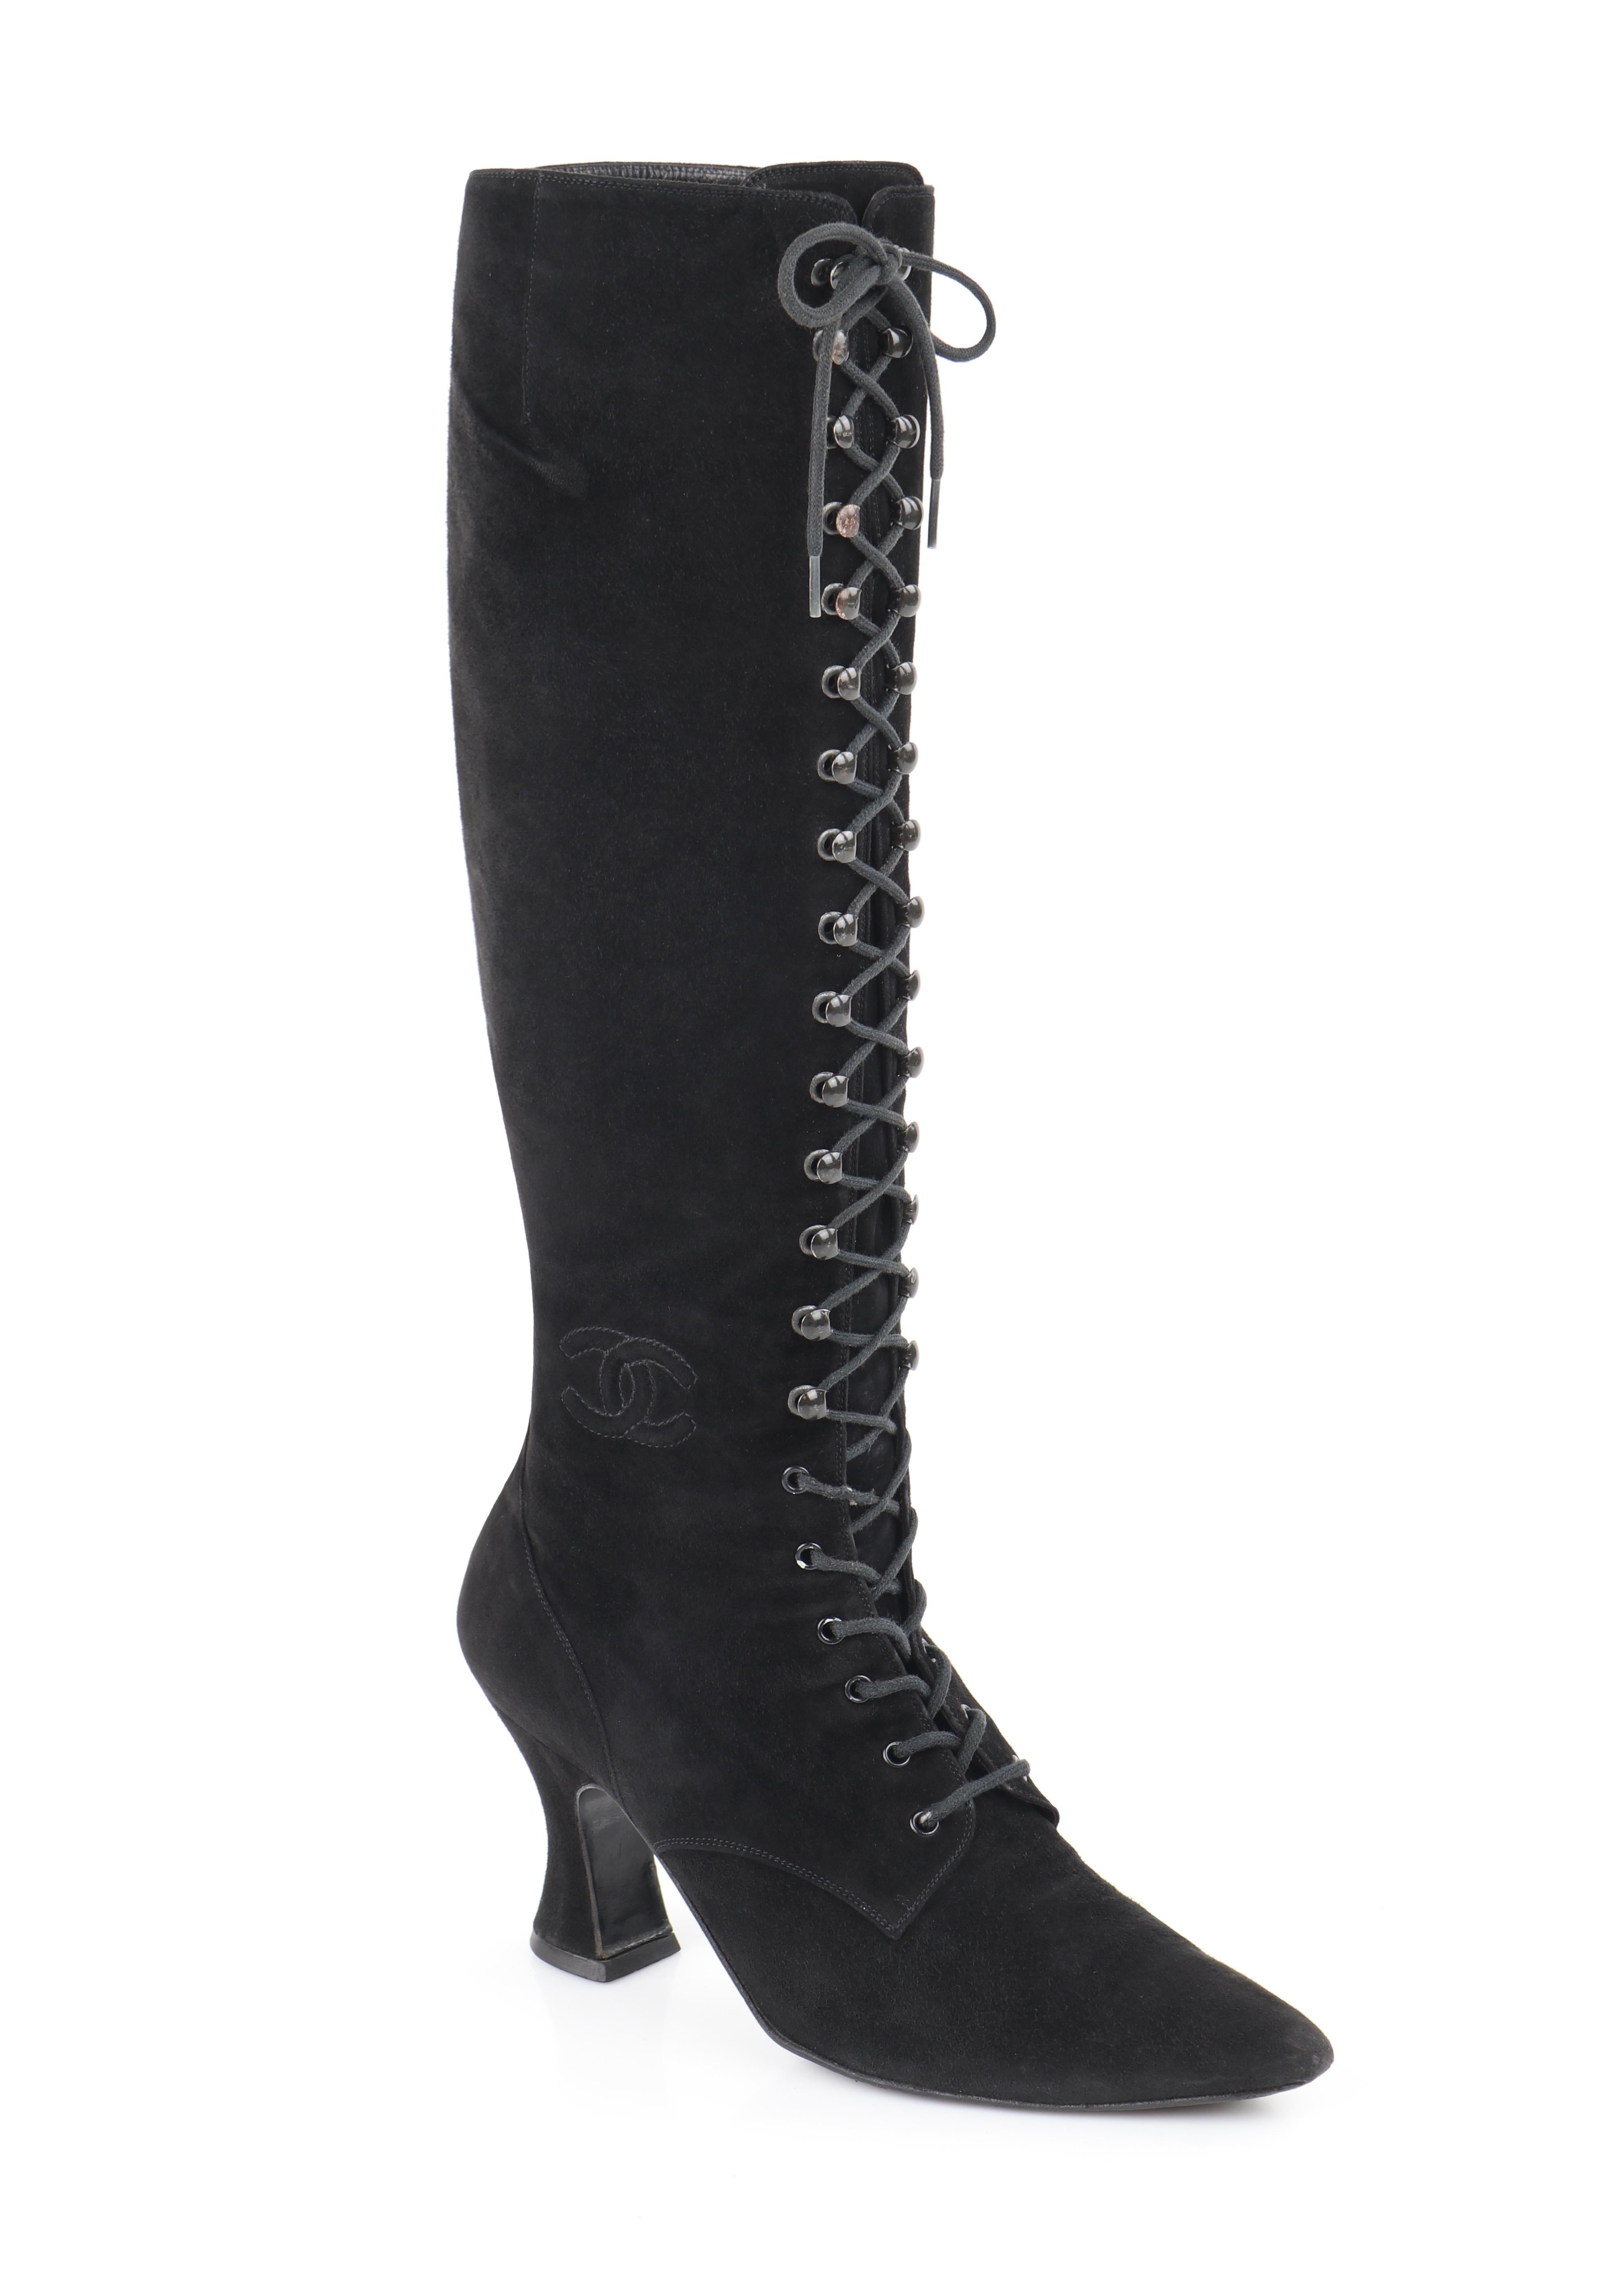 CHANEL Black Suede Leather Victorian Look Knee-High Lace Up Pointed Toe Boots

Brand / Manufacturer: Chanel 
Designer: Karl Lagerfeld
Style: Knee-High boots
Color(s): Shades of black
Lined: Yes
Unmarked Fabric Content (feel of): Suede (primary